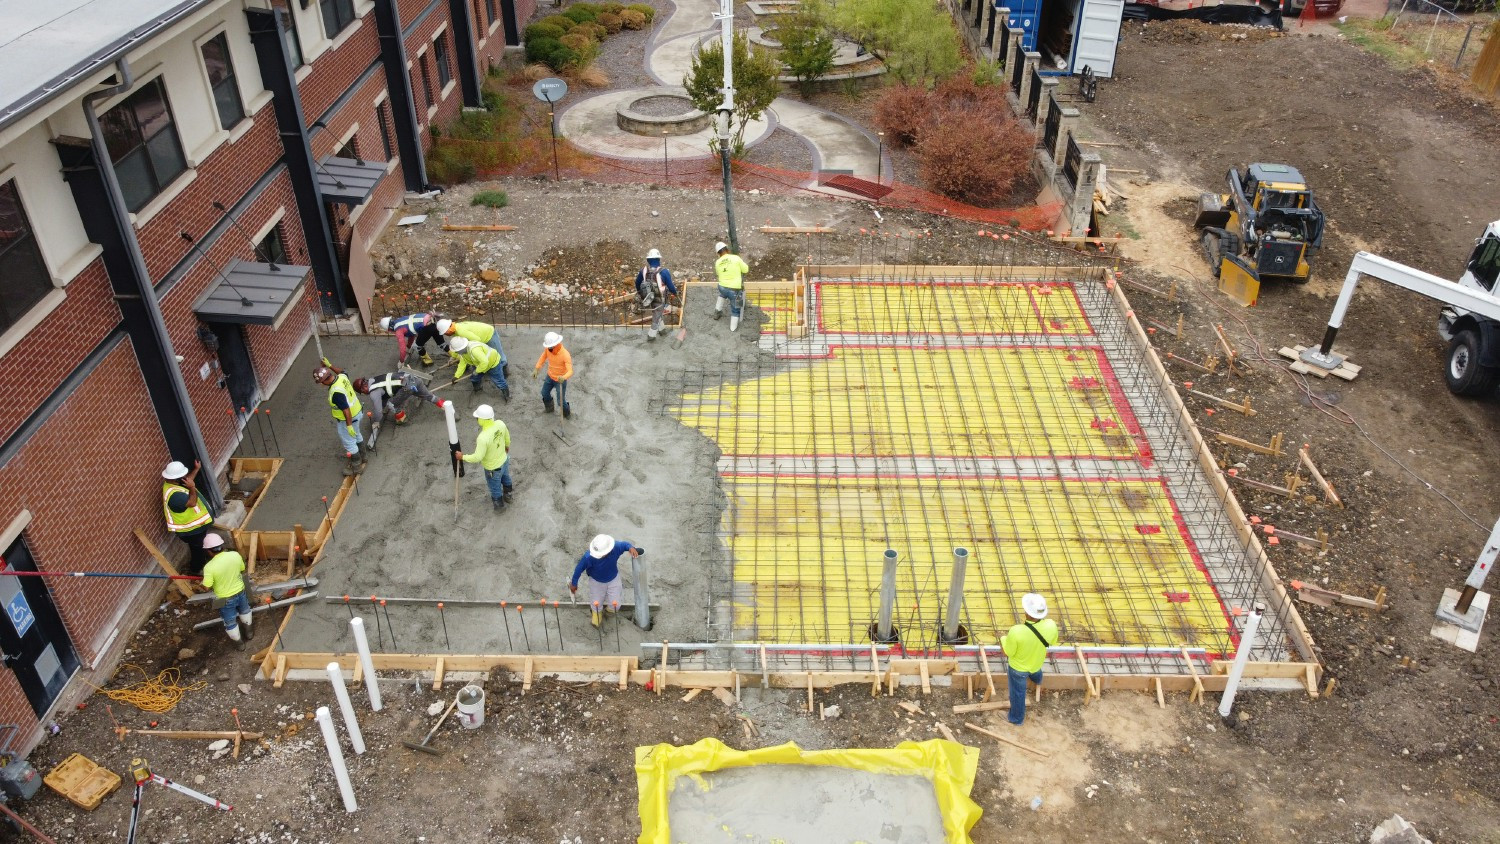 Falkenberg employees expertly handling a concrete pour on the jobsite.